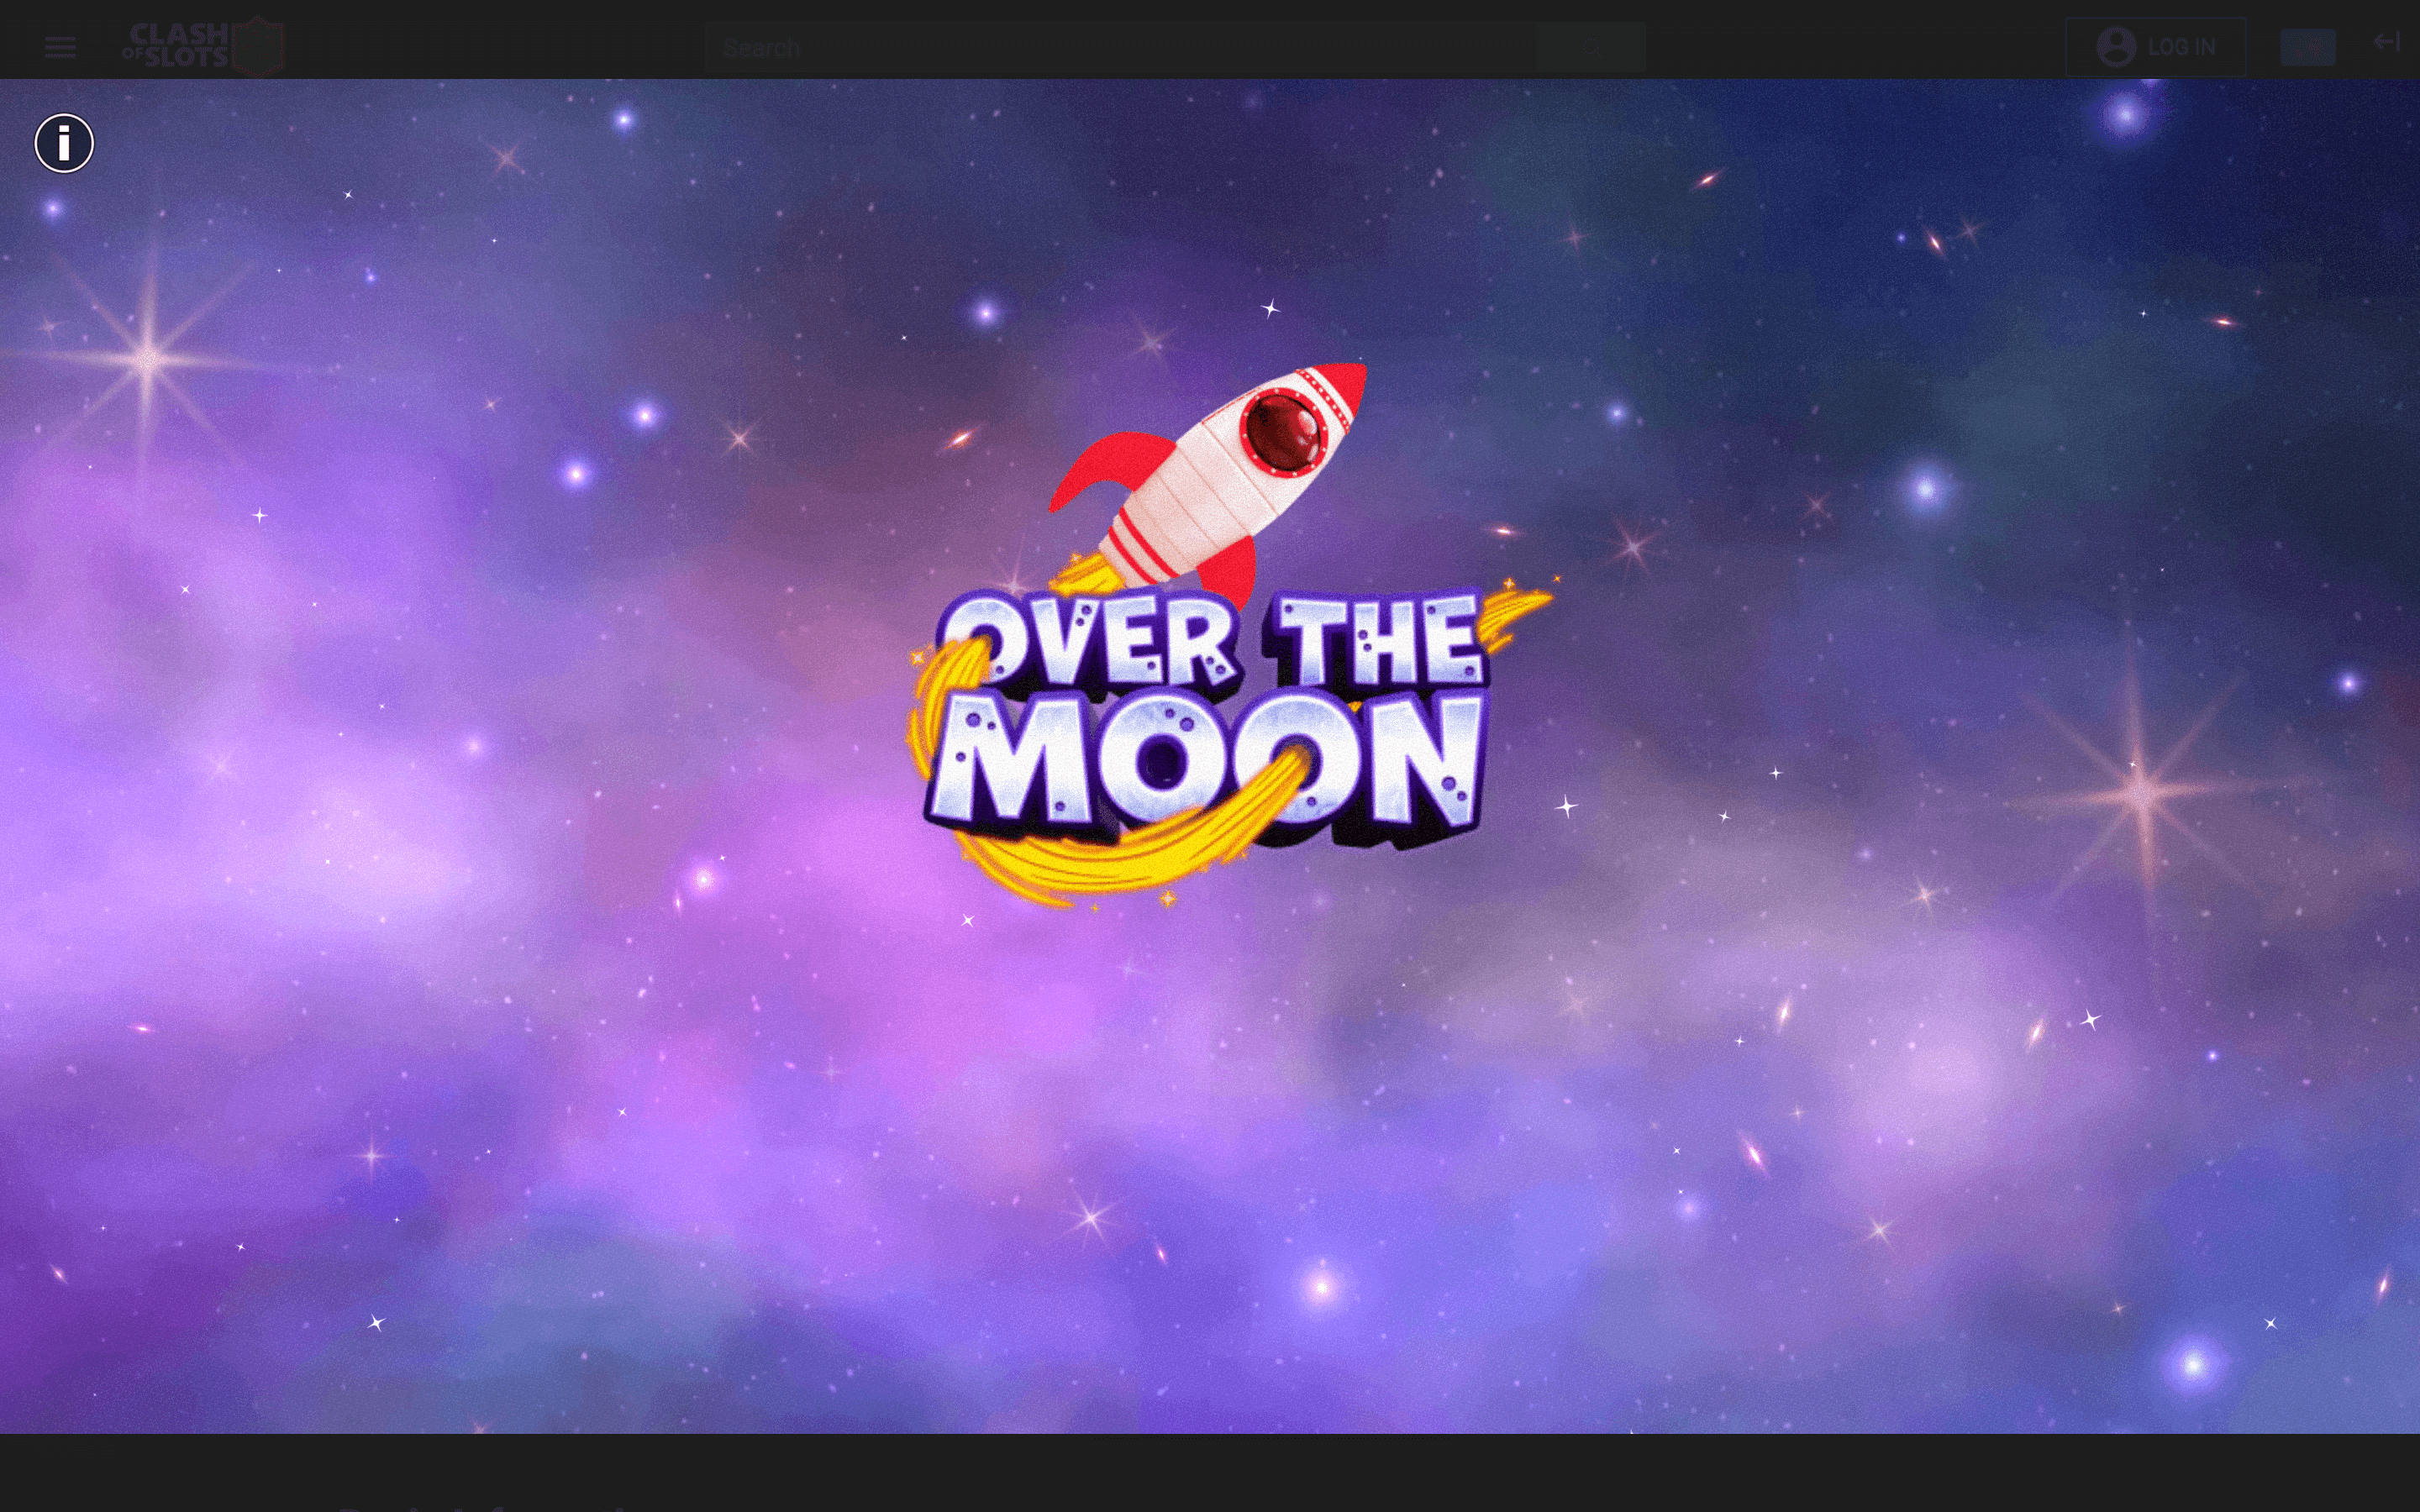 Over the Moon Trailer - Emirates Casino Slot Review